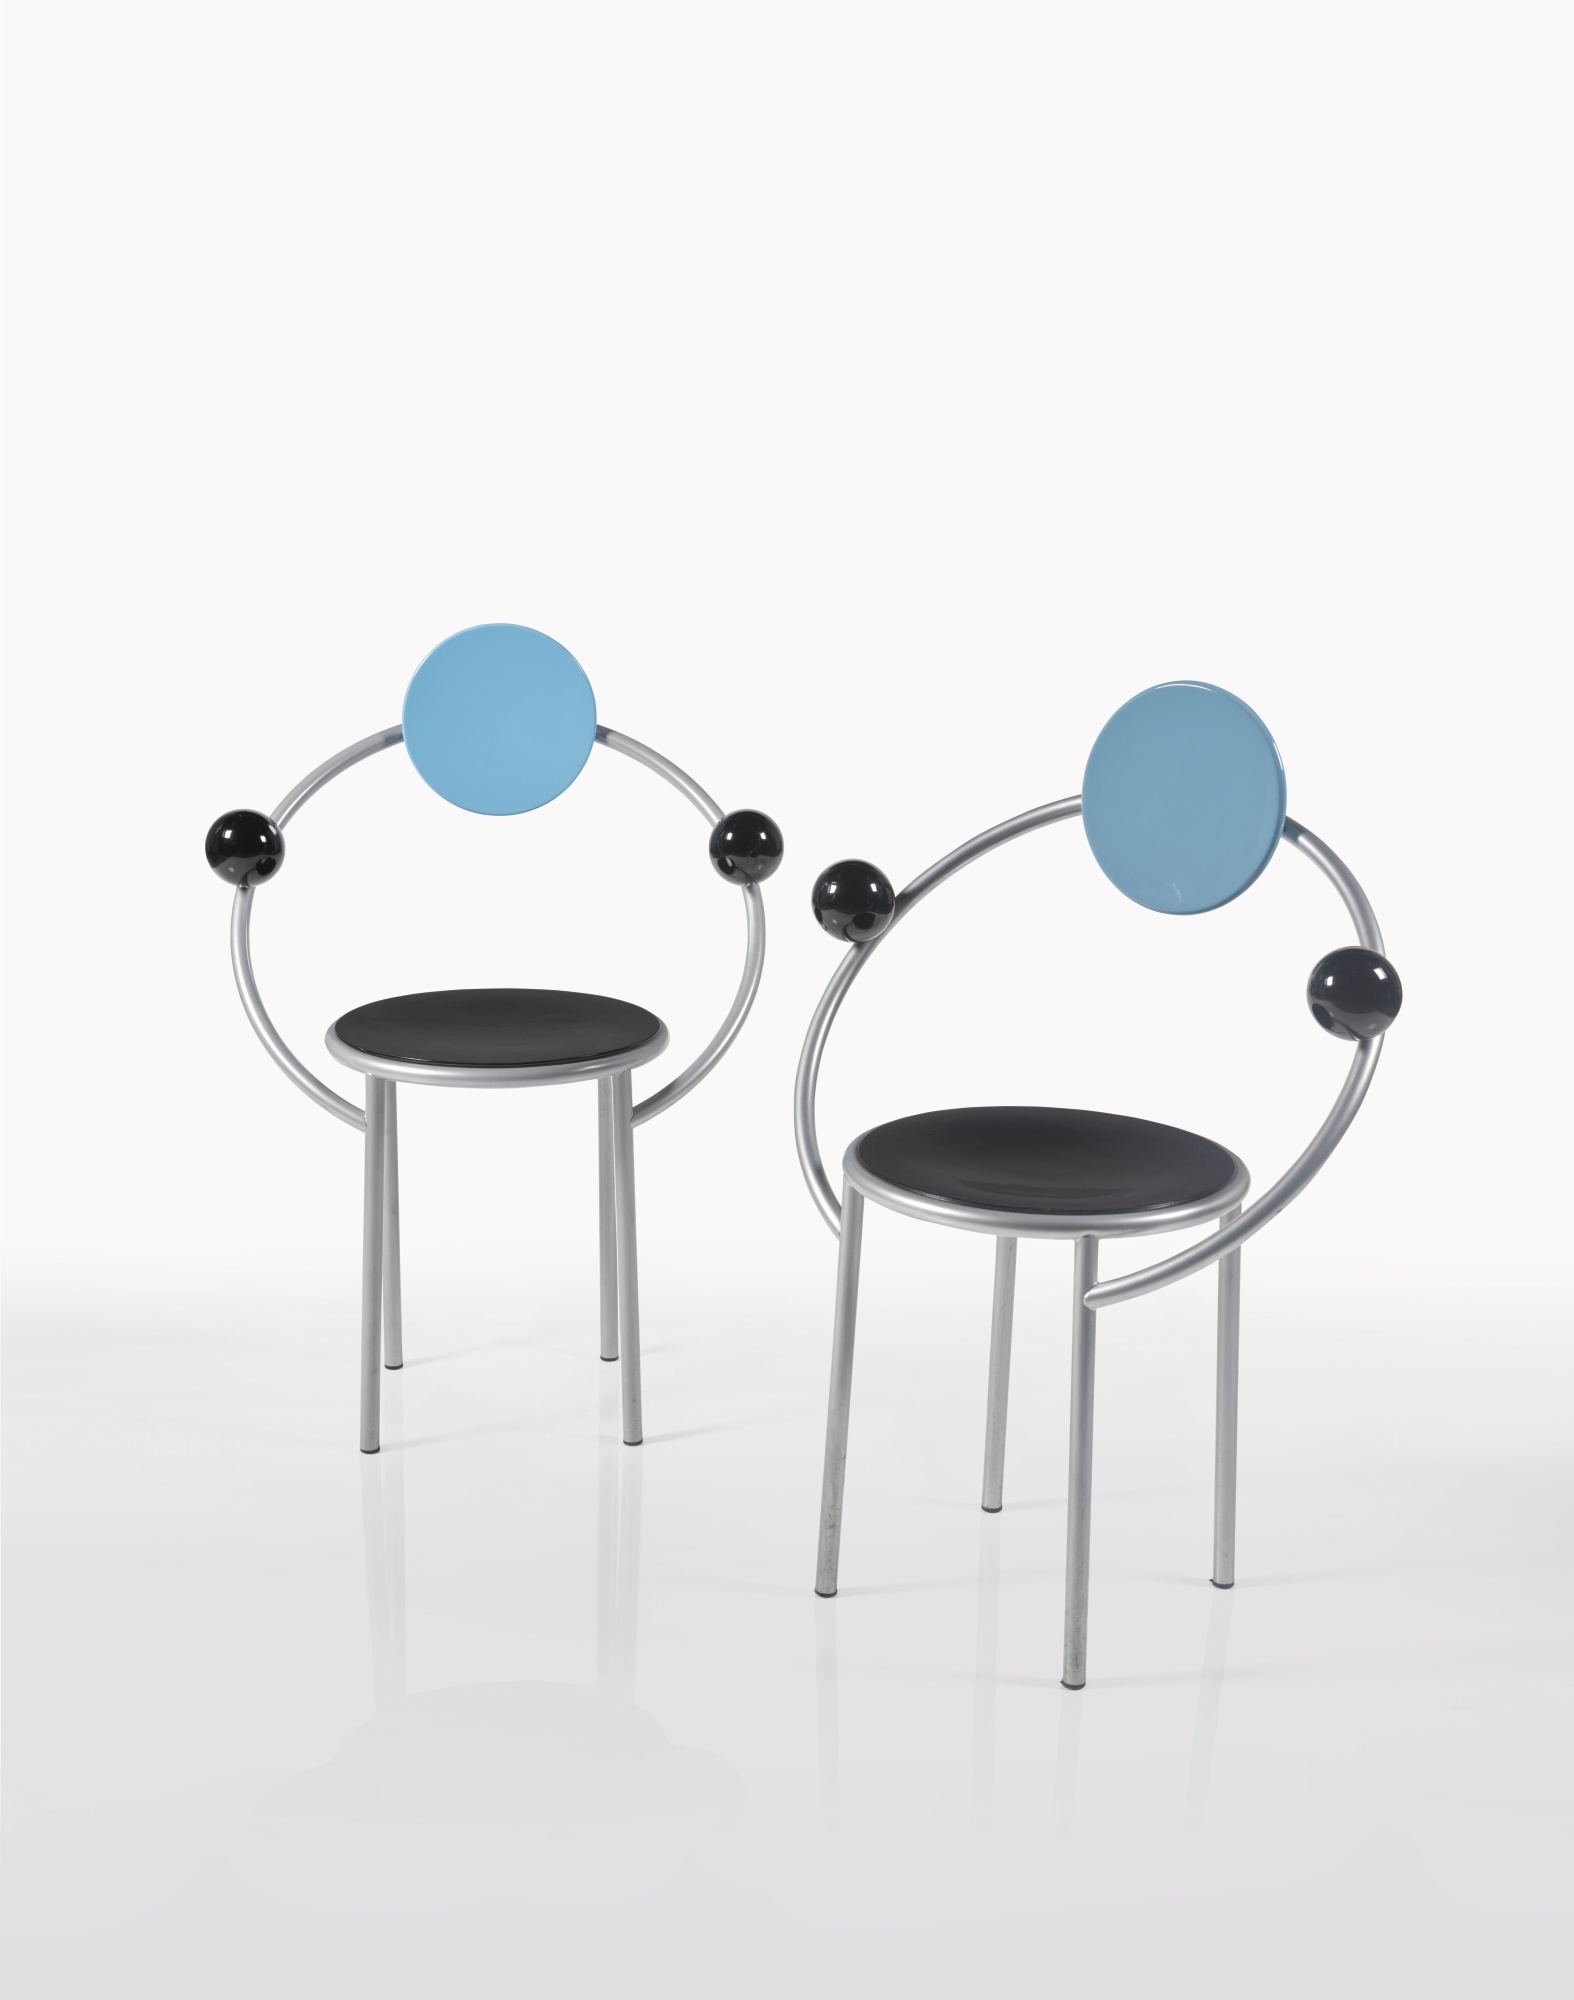 TWO 'FIRST' CHAIRS by Michele de Lucchi, designed 1983